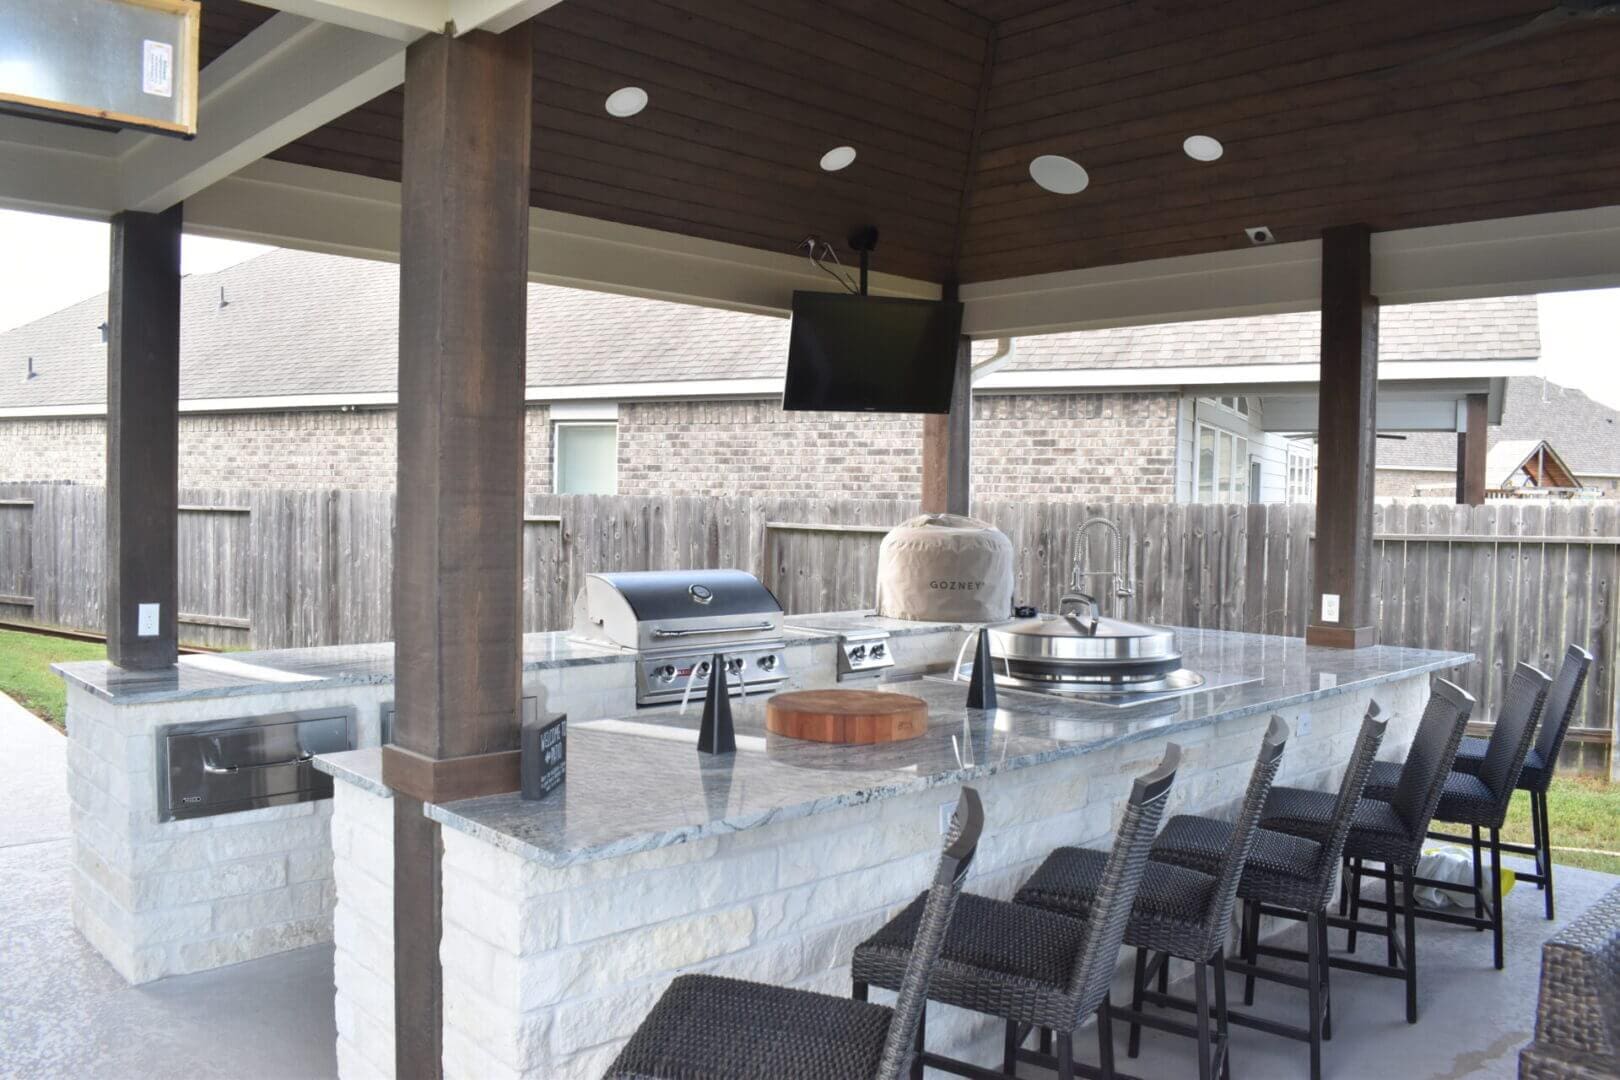 A large outdoor kitchen with an entertainment center.